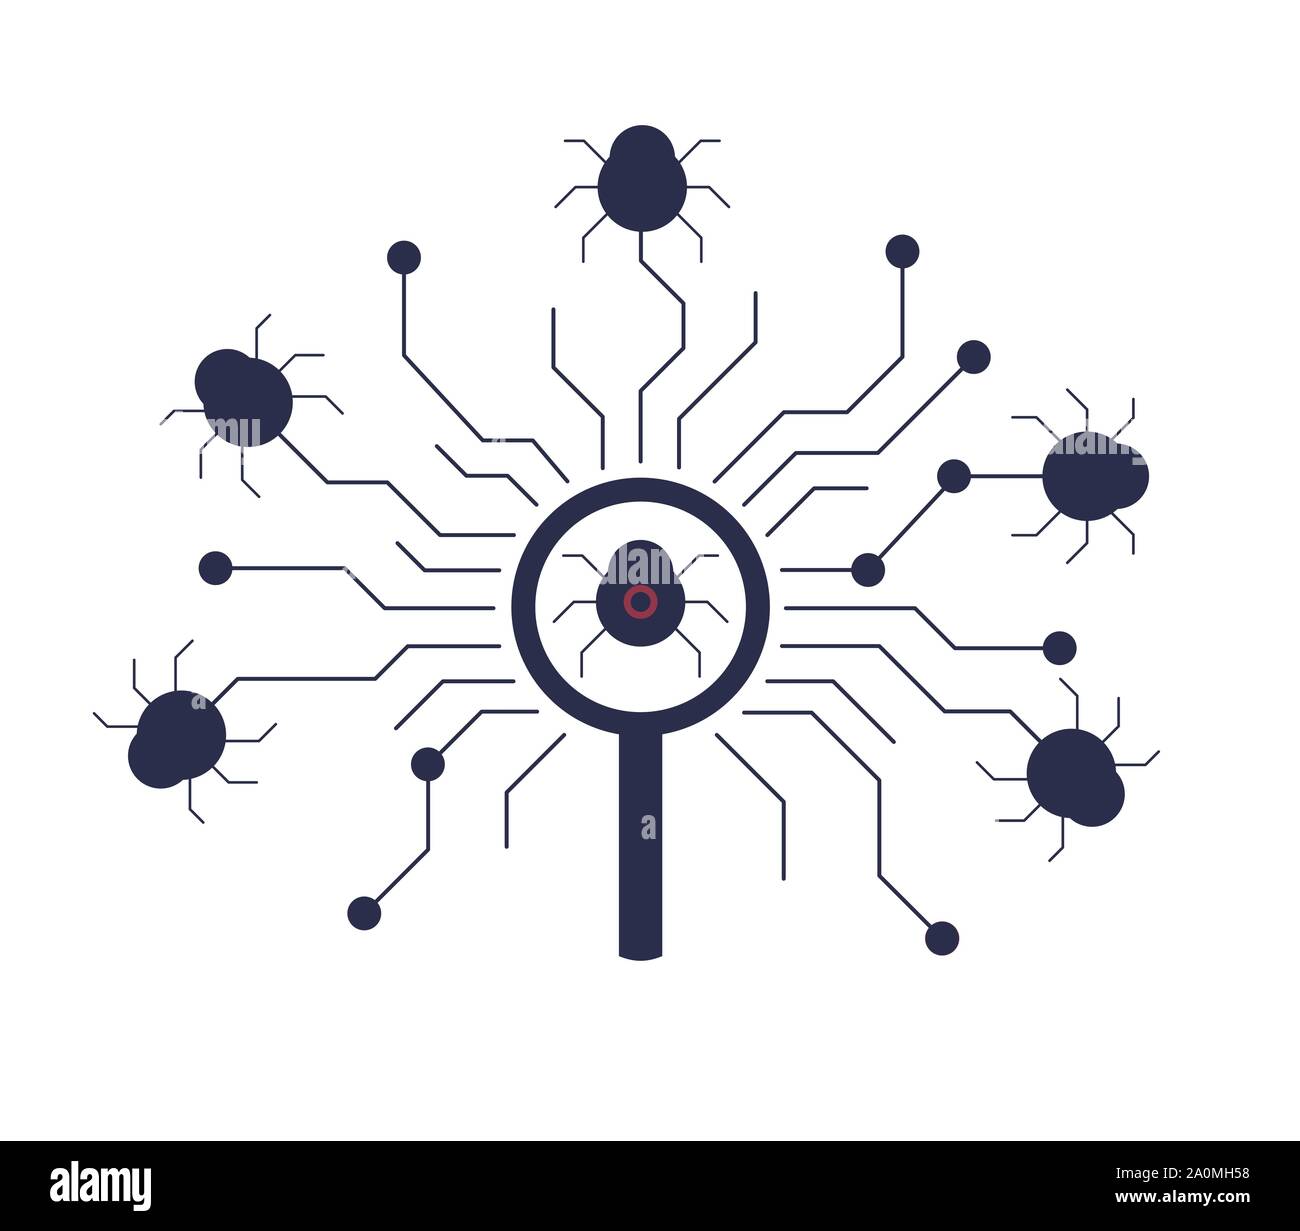 Antivirus software searching for viruses, malwares and vulnerabilities. Stock Vector